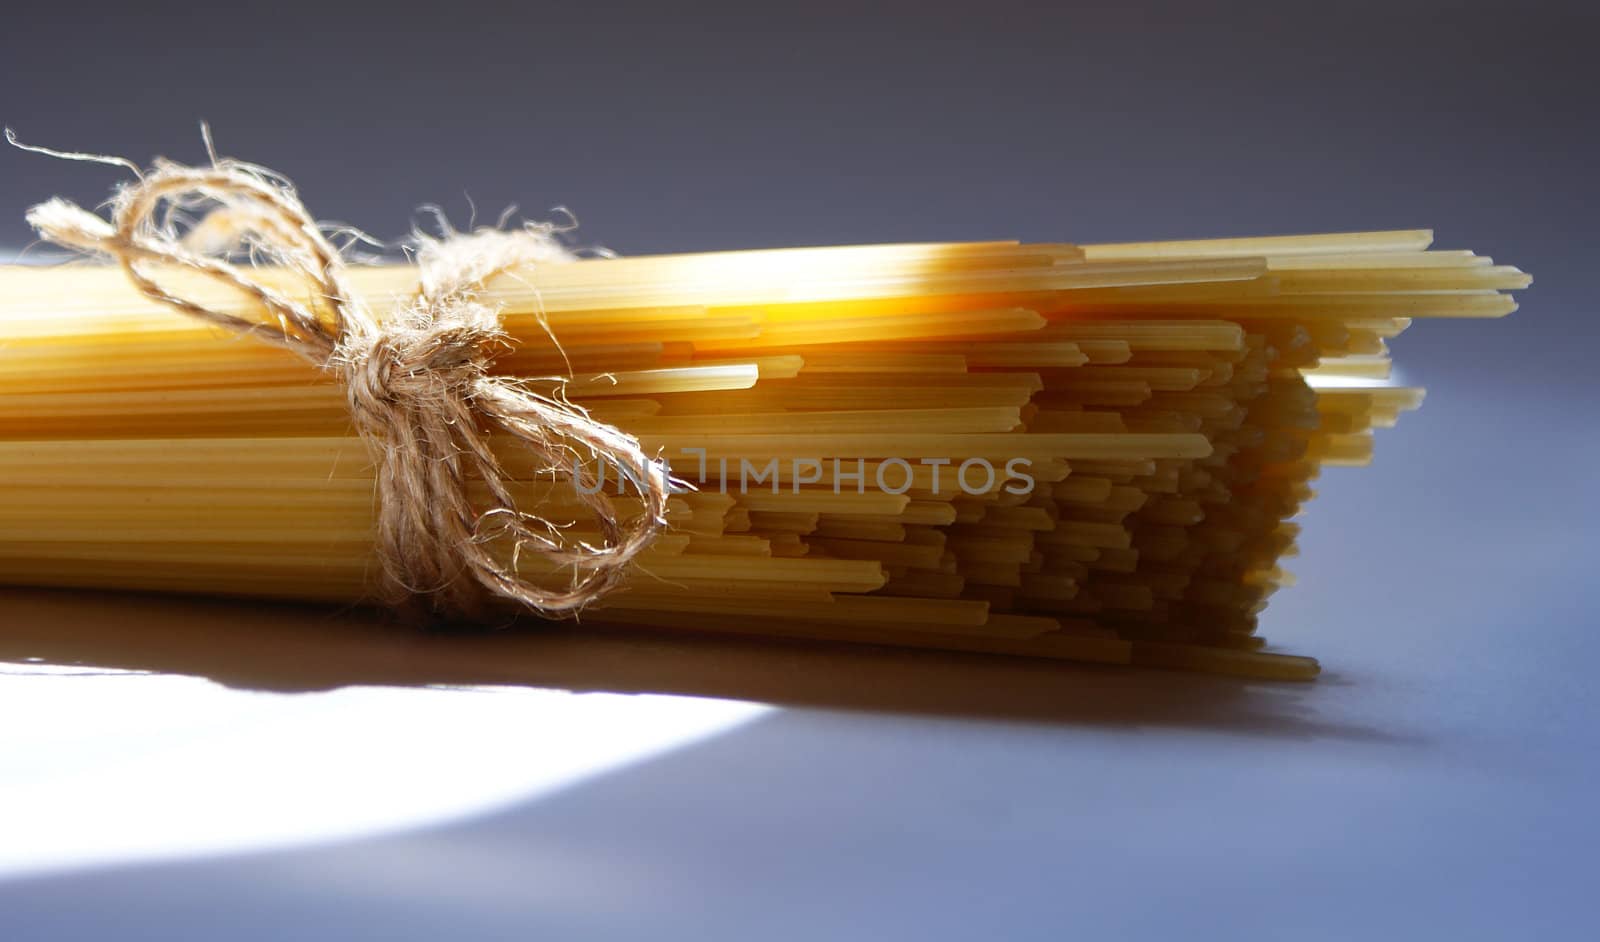 spaghetti pasta tied and sunlit against light and shadow background